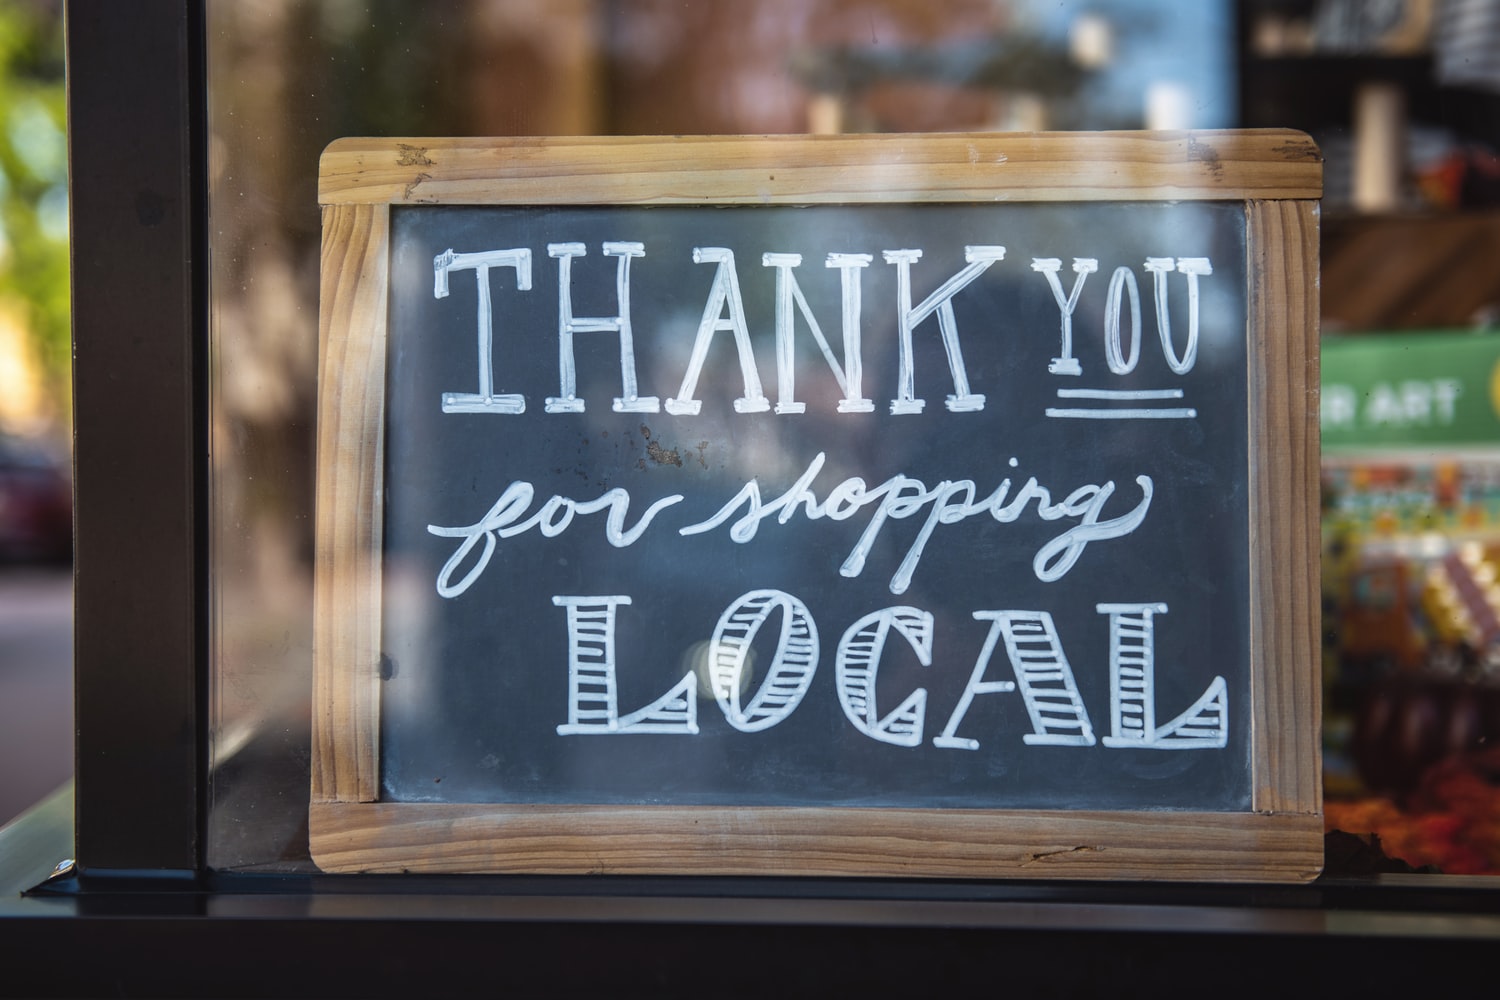 Top 5 Reasons to Shop local